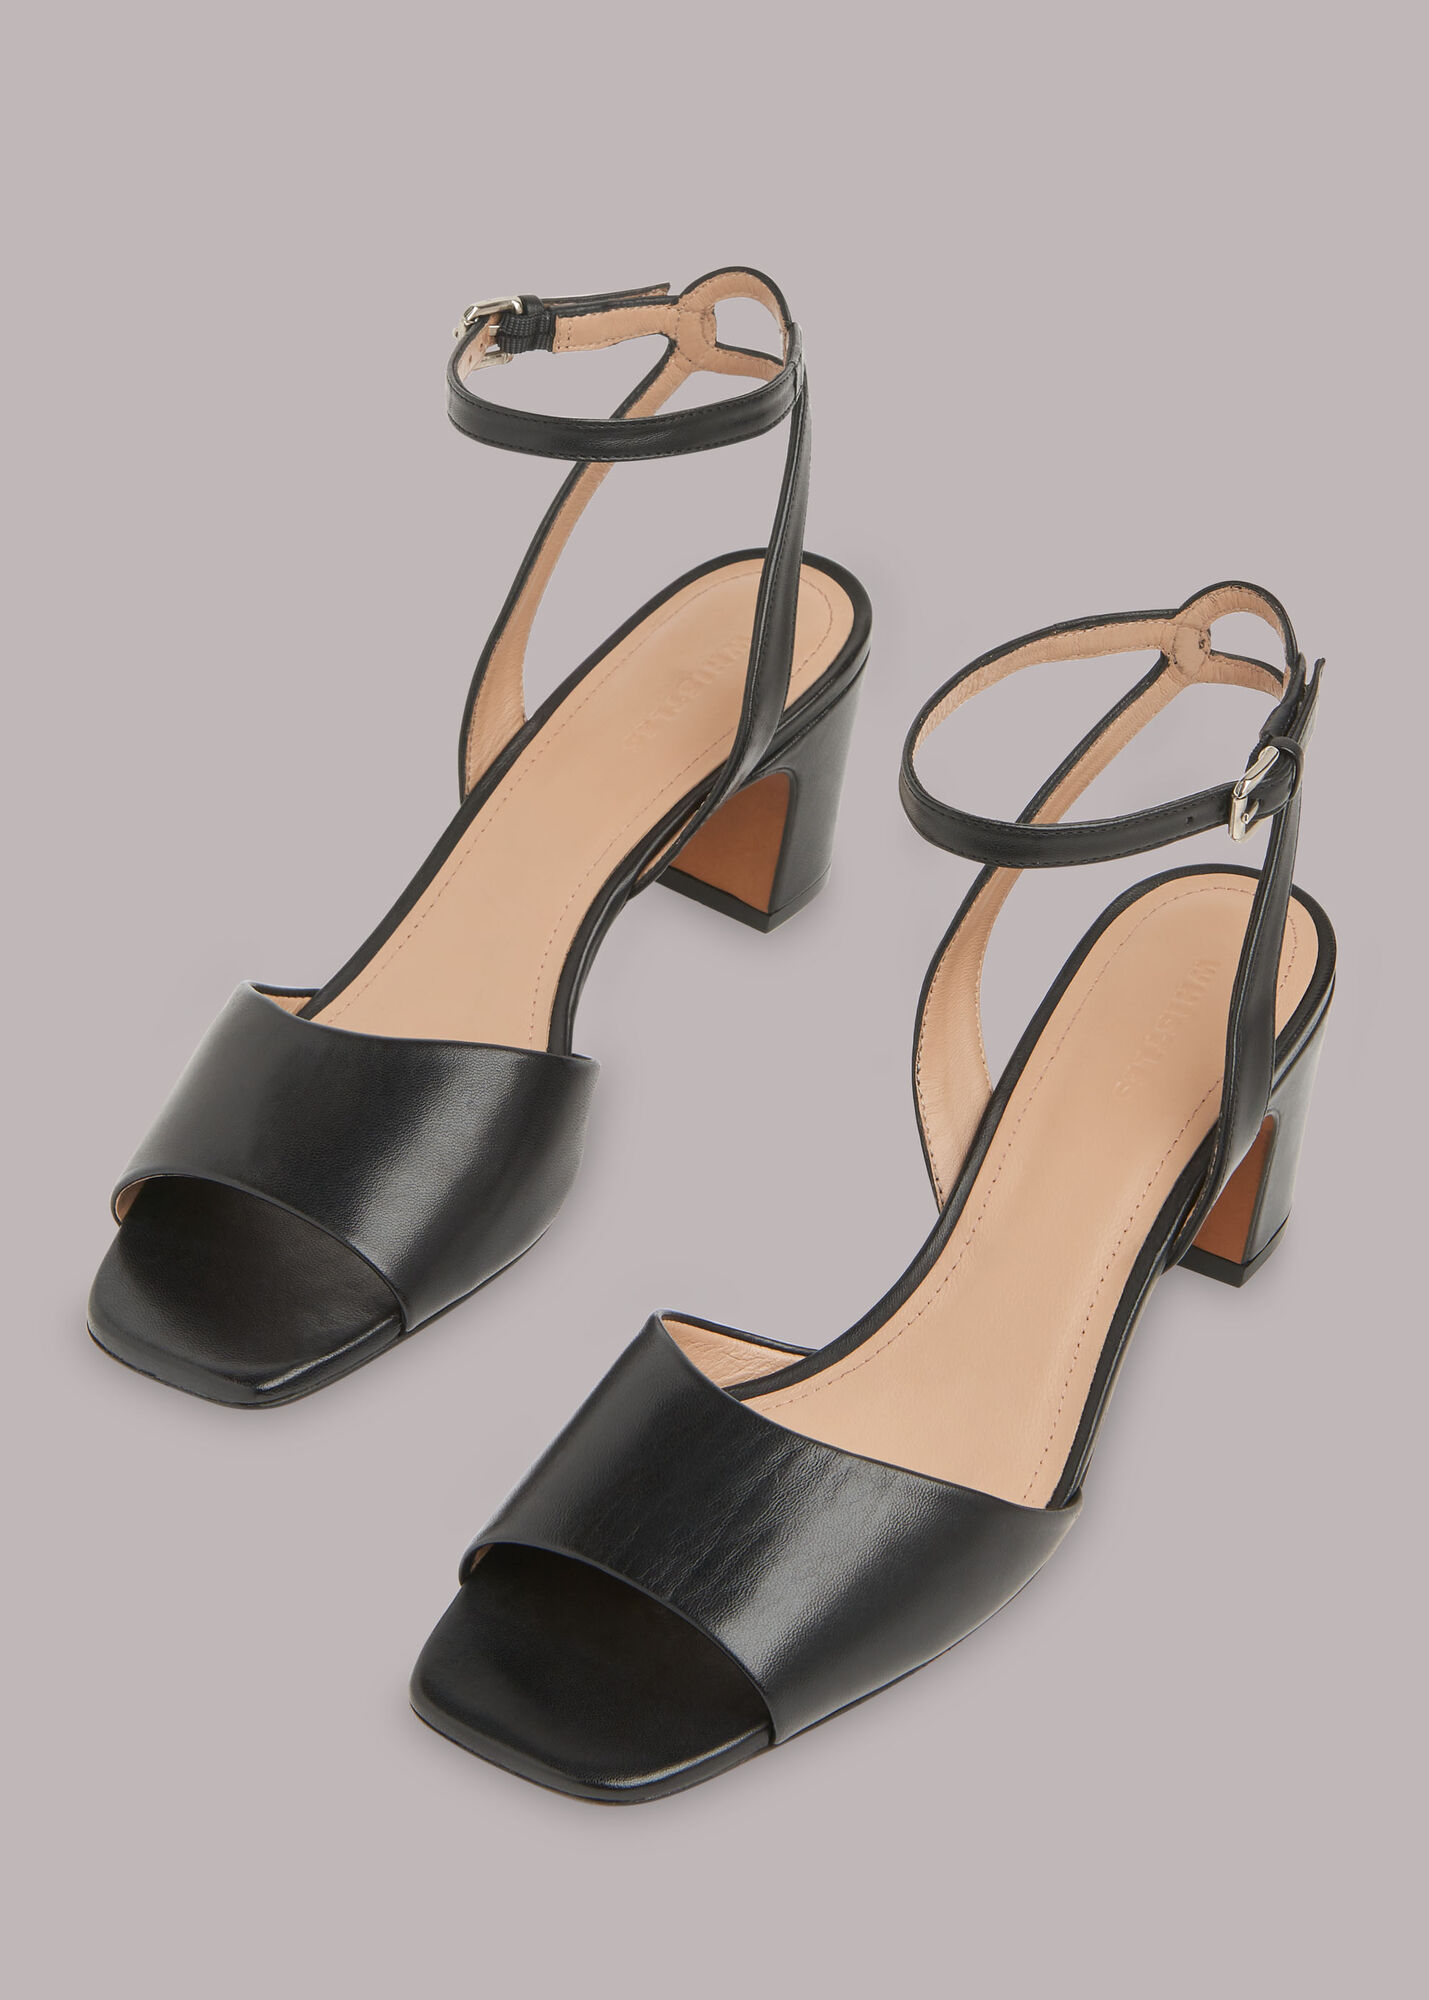 Black Leather Sandals With Block Heel & Open Toe | Whistles